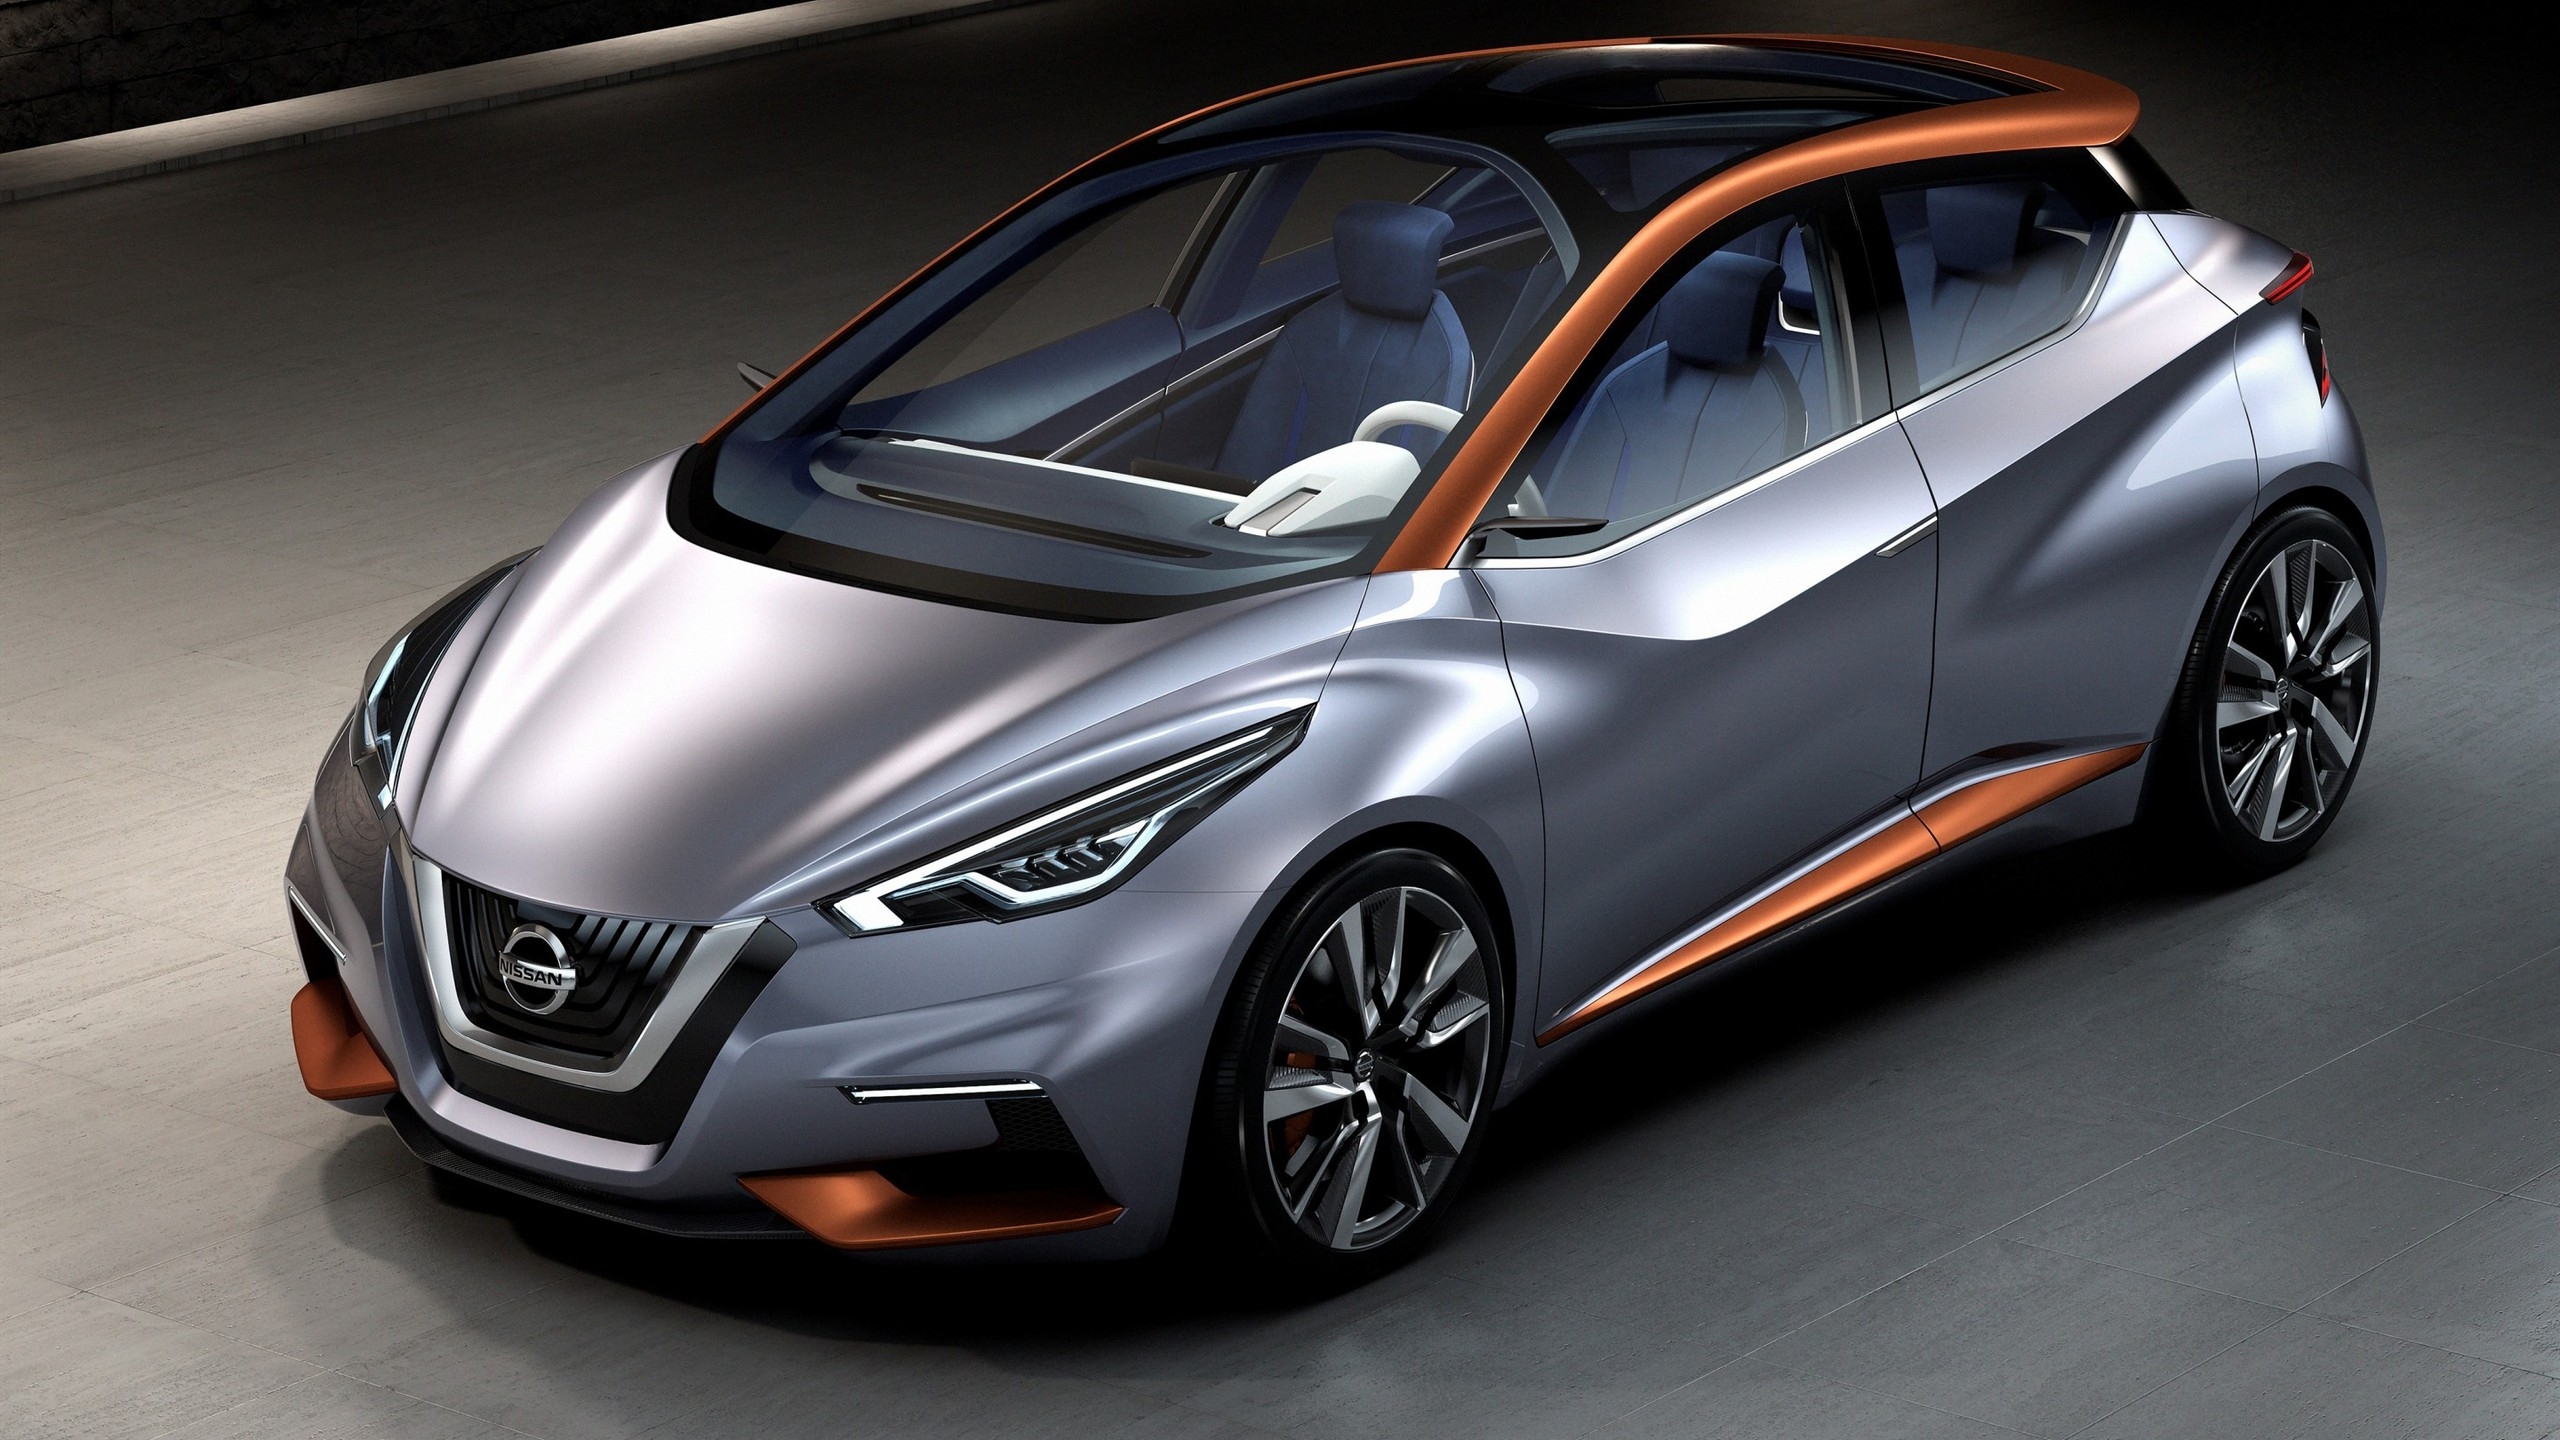 2015 Nissan Sway Concept for 2560x1440 HDTV resolution